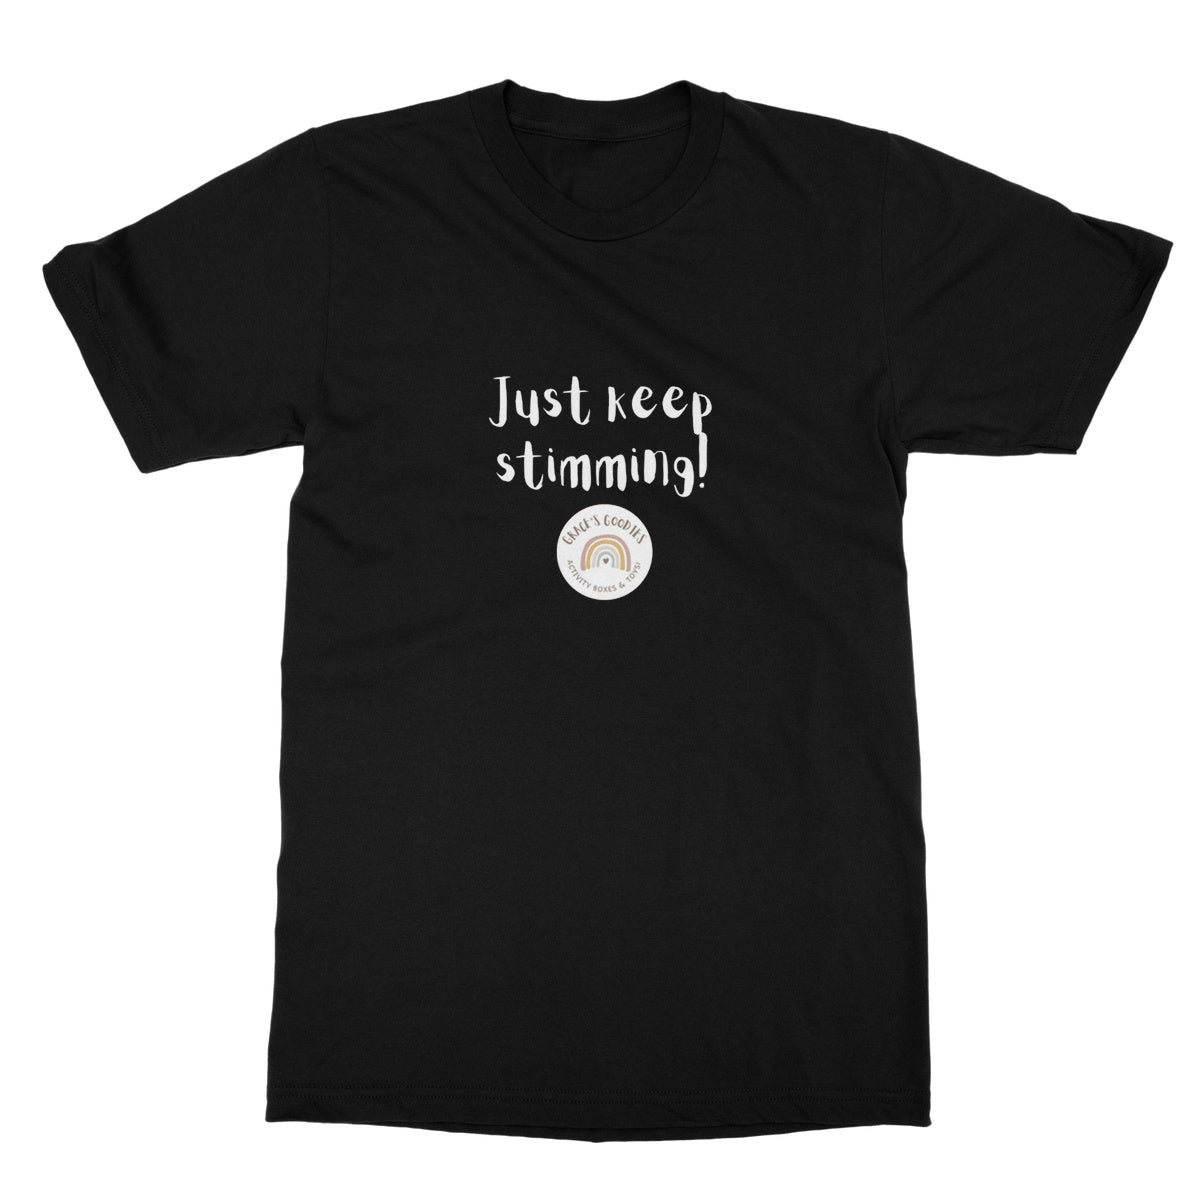 Just keep stimming Softstyle T-Shirt - Adult